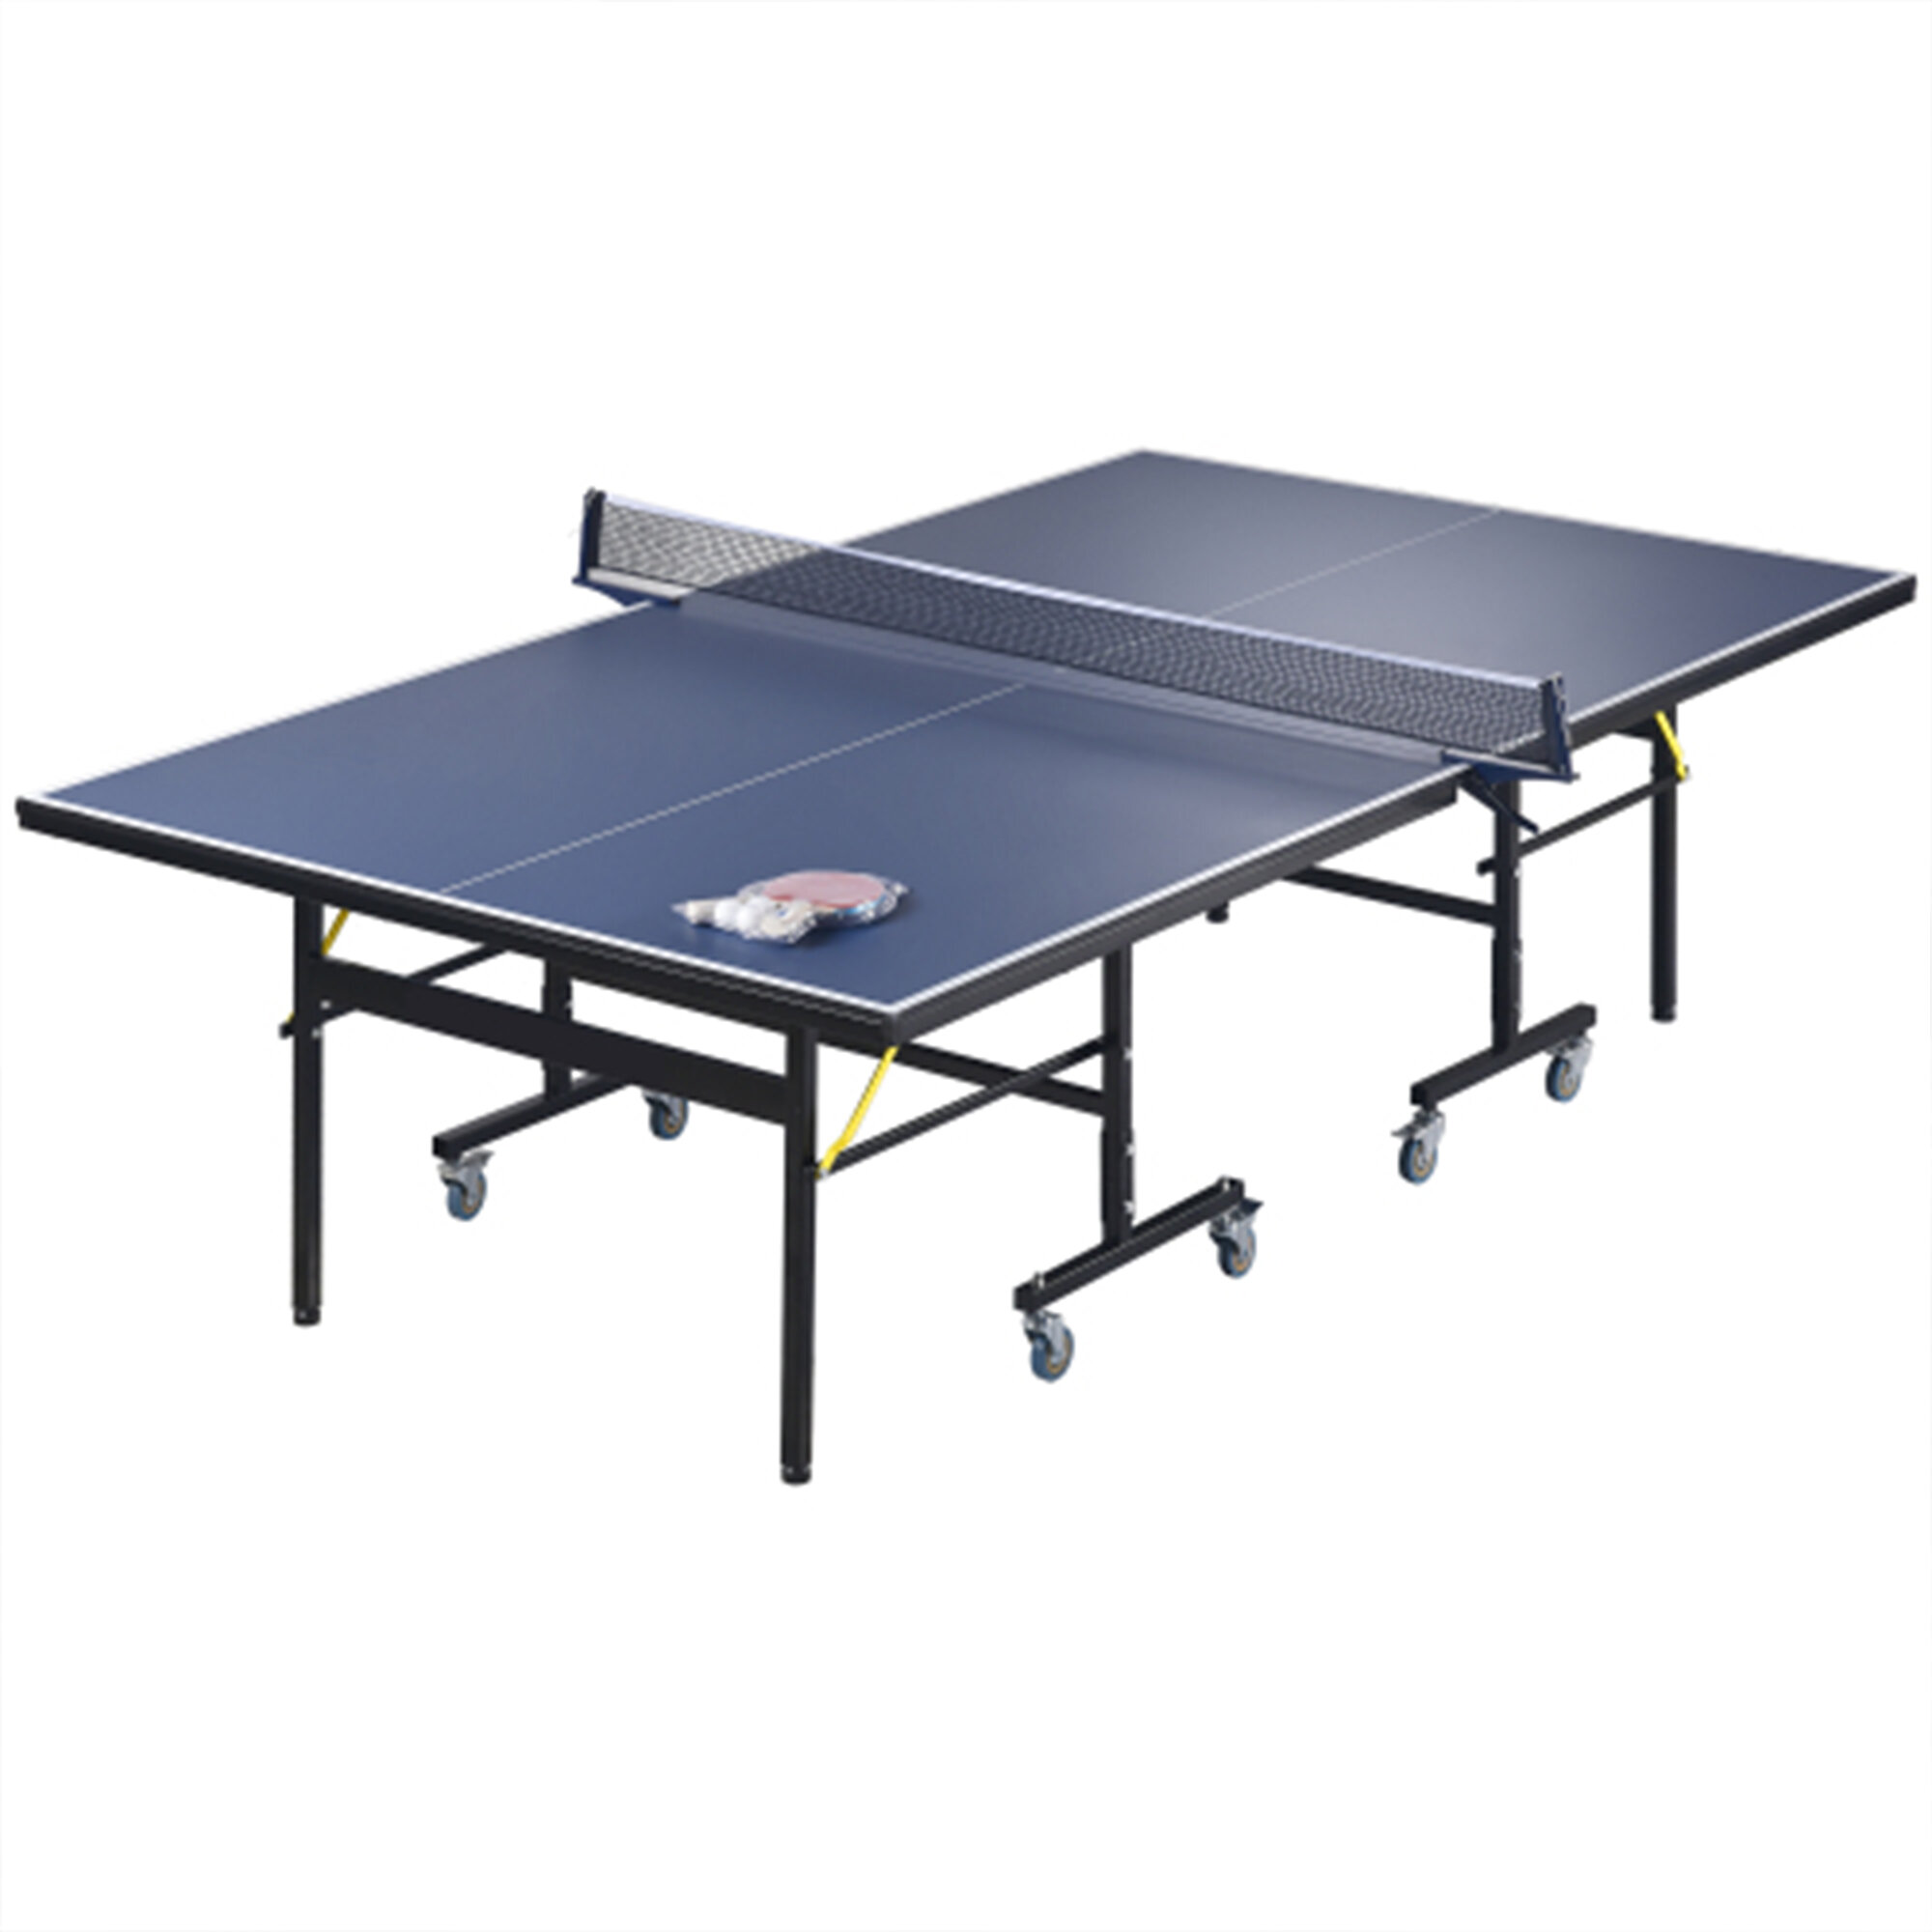 Table tennis net Rack Ping pong Support Sports Portable Indoor High quality New 